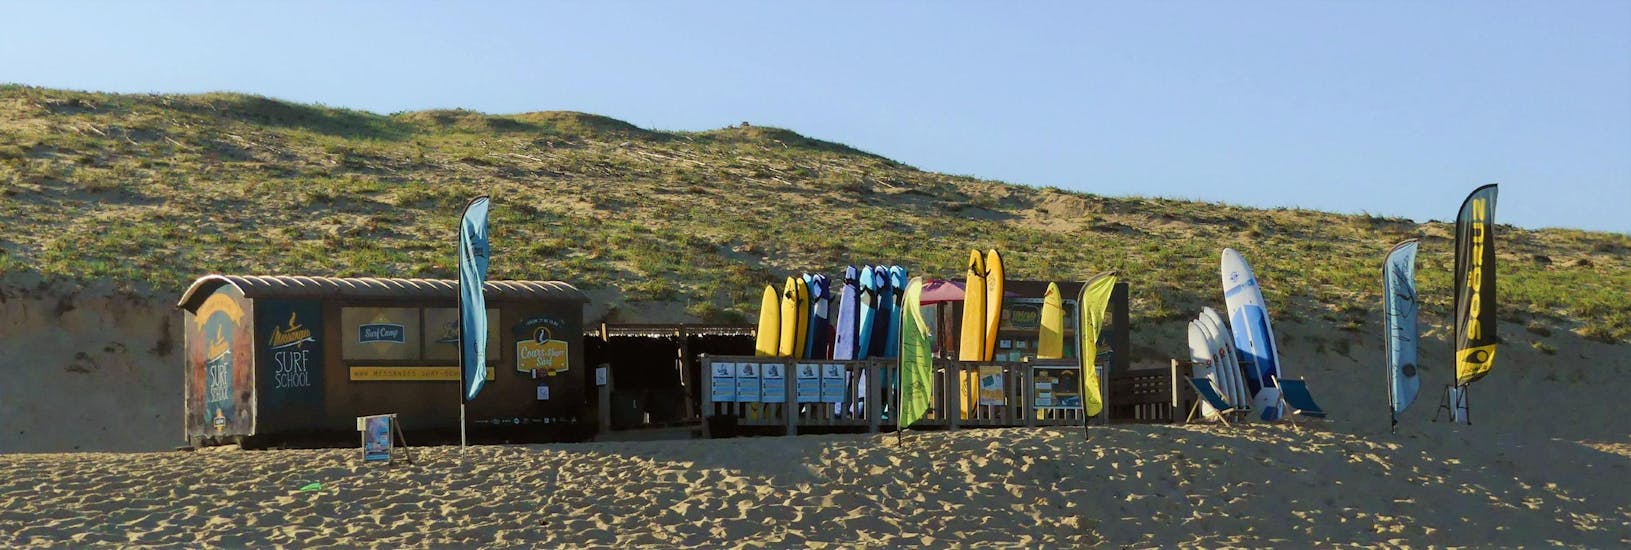 The base of Messanges Surf School on the south beach of Messanges, where surfing lessons take place.